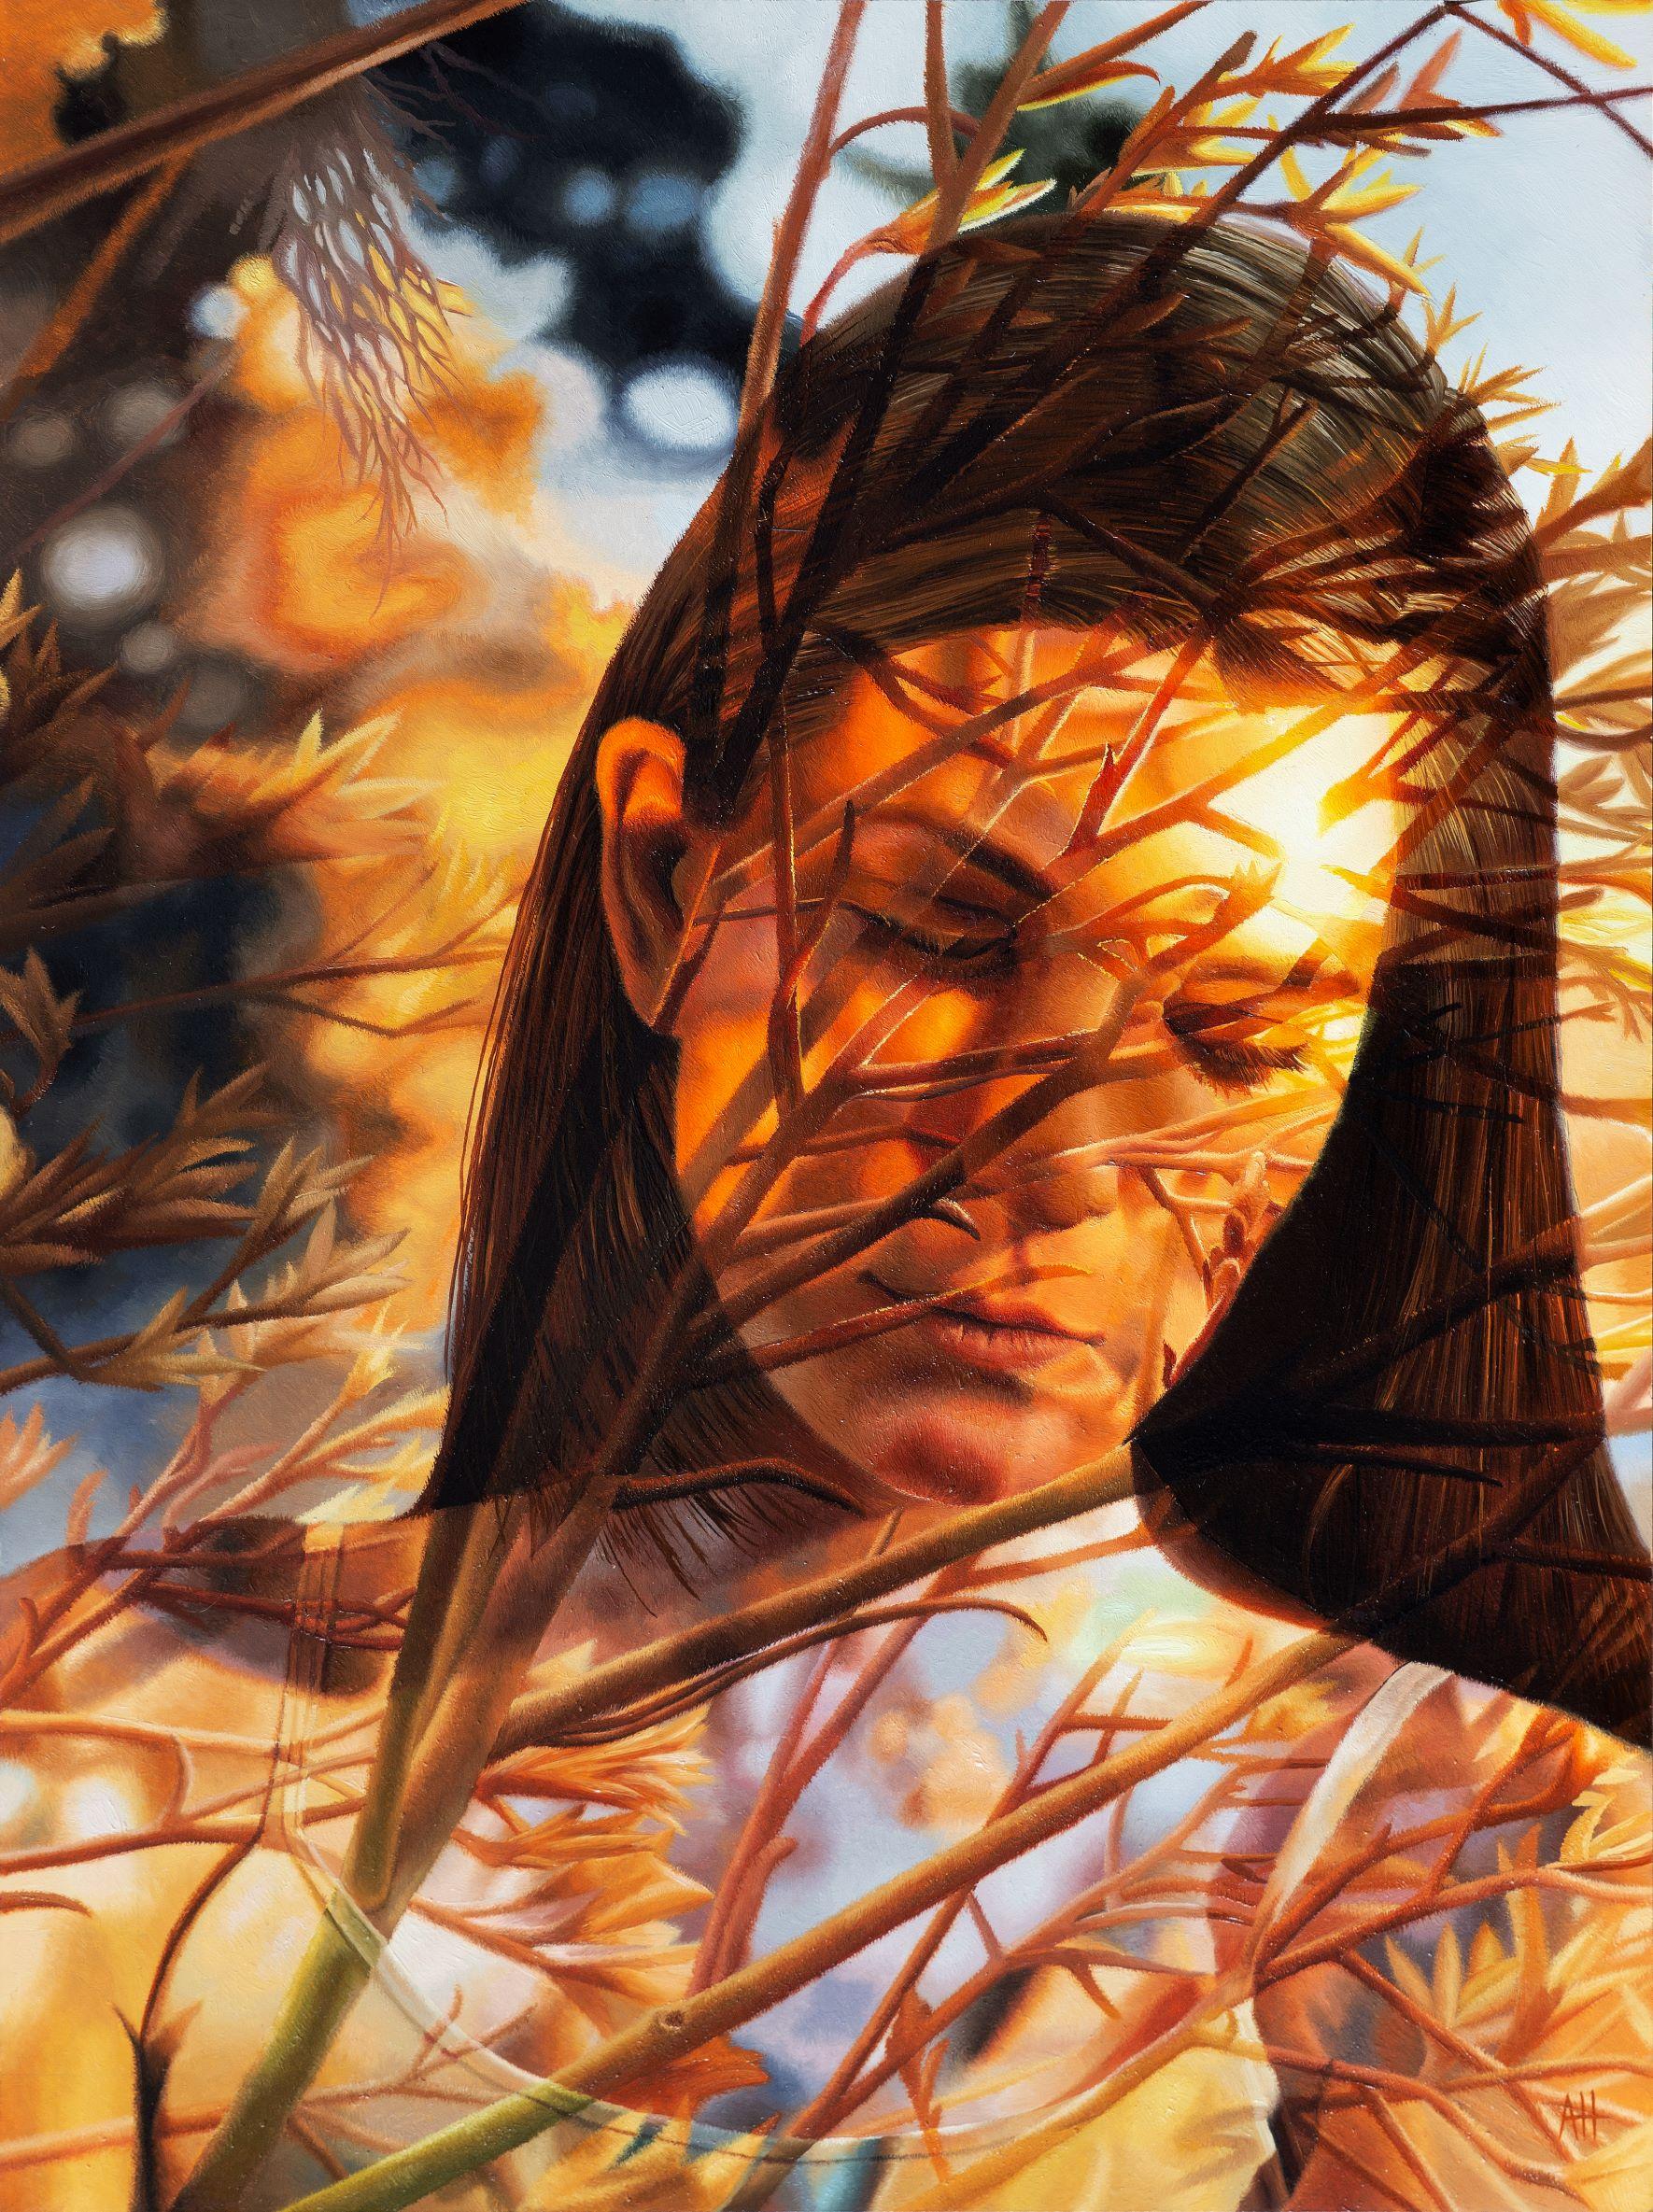 Austin Howlett Figurative Painting - "Coherence" Oil Painting